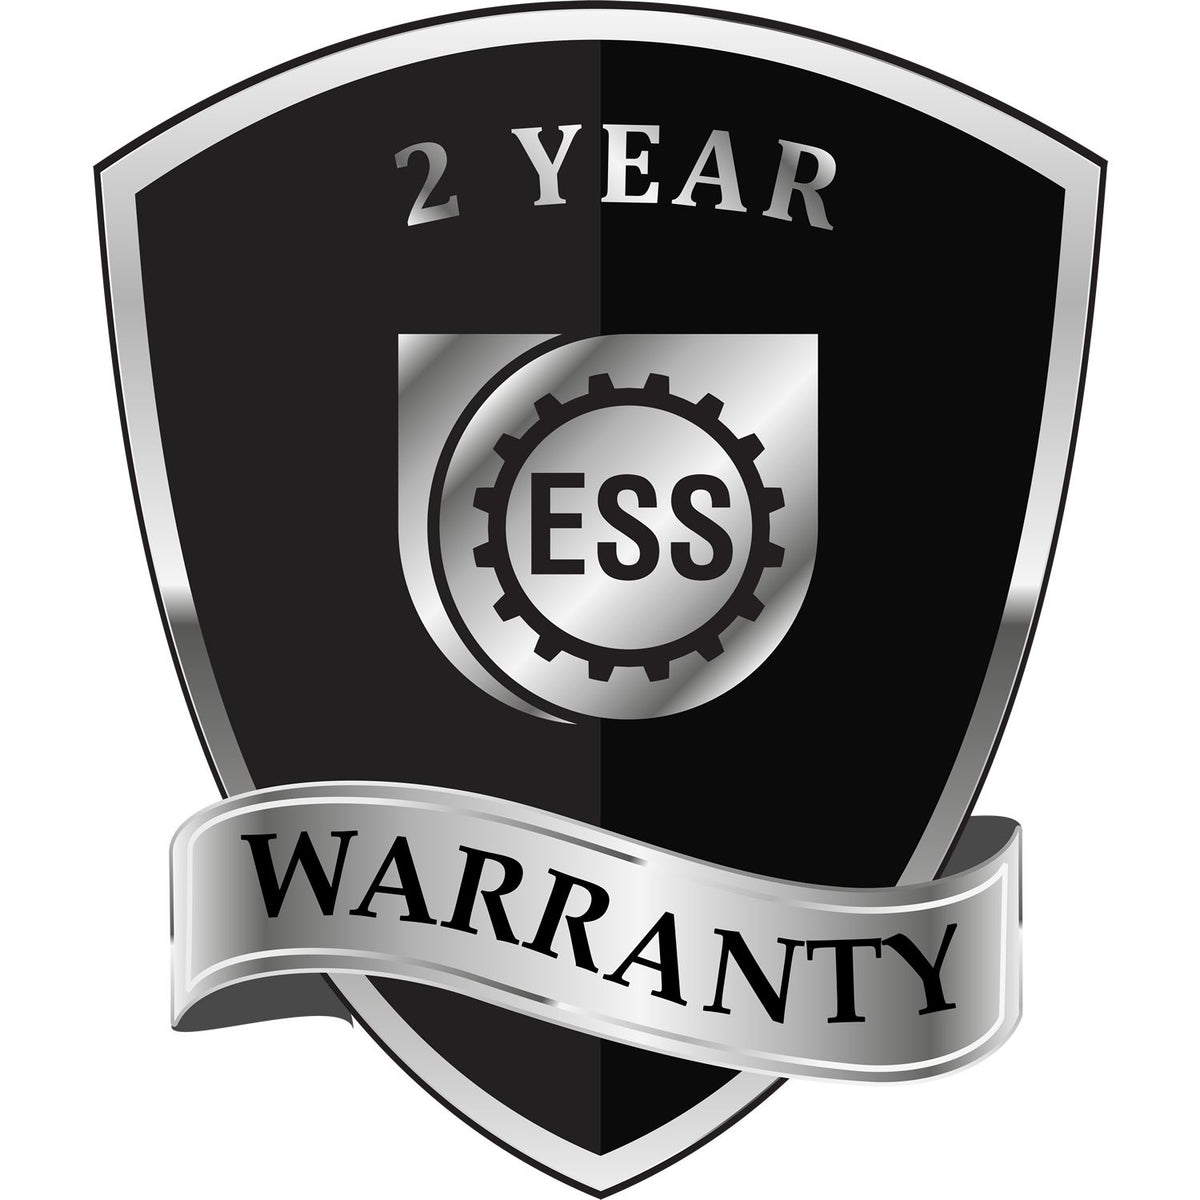 A badge or emblem showing a warranty icon for the Iowa Desk Surveyor Seal Embosser